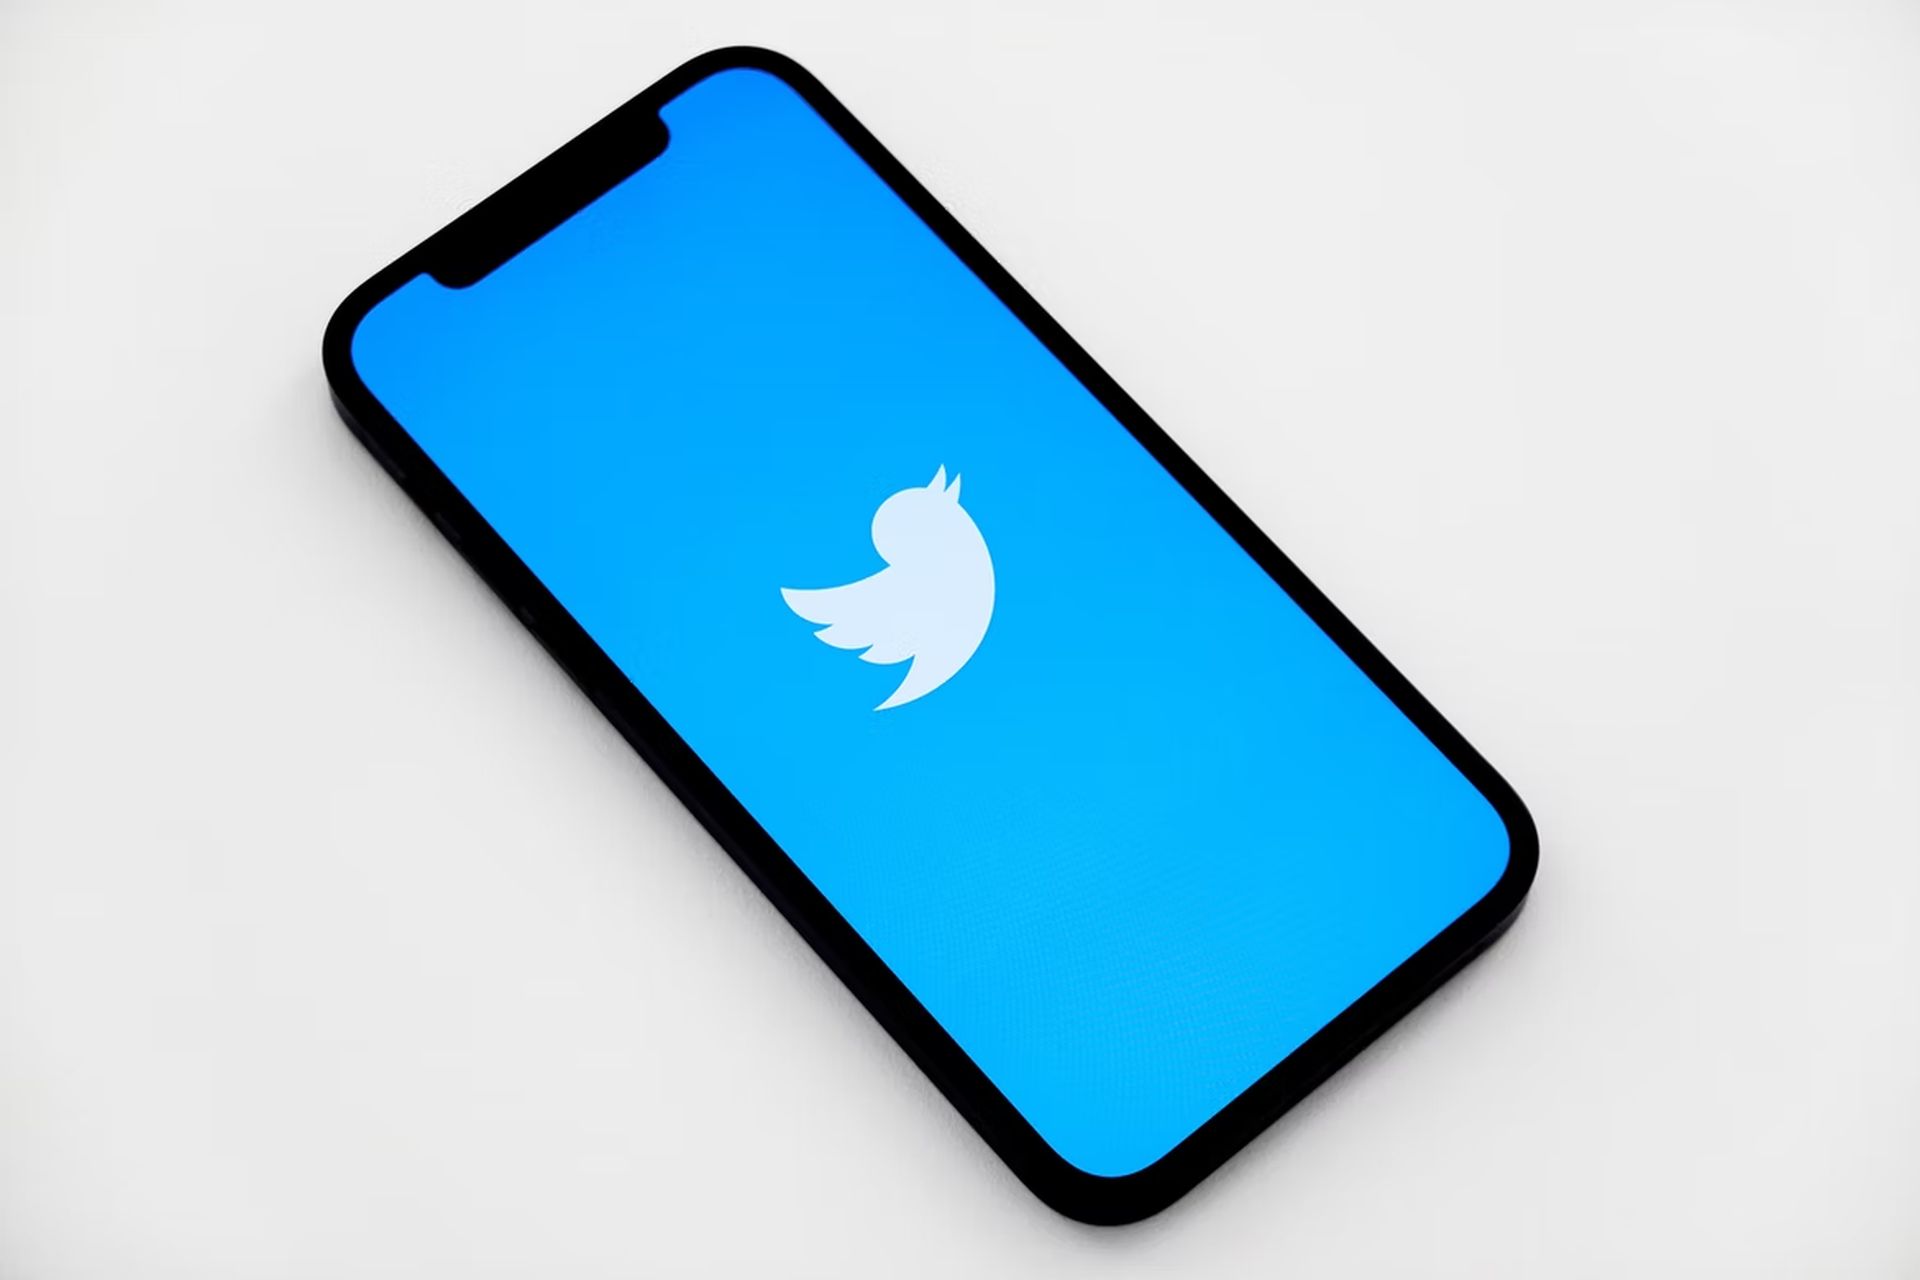 Over 3200 mobile apps have been found by security experts to be leaking Twitter API keys, potentially allowing threat actors to take over user accounts.